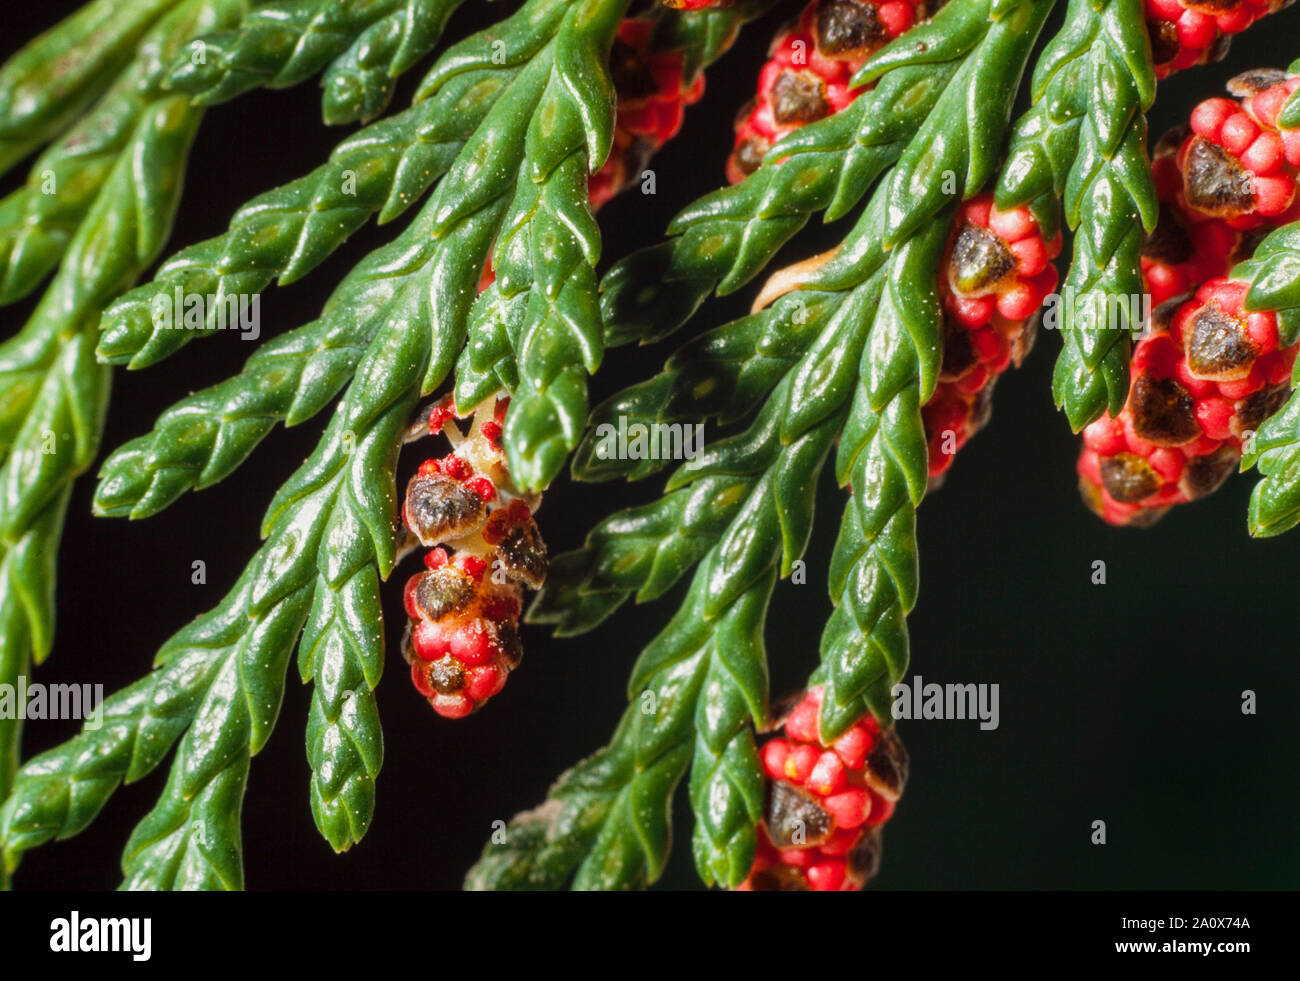 Lawson Cypress, Chamaecyparis lawsoniana, native to Western USA, close-up detail of young male pollen bearing cones Stock Photo